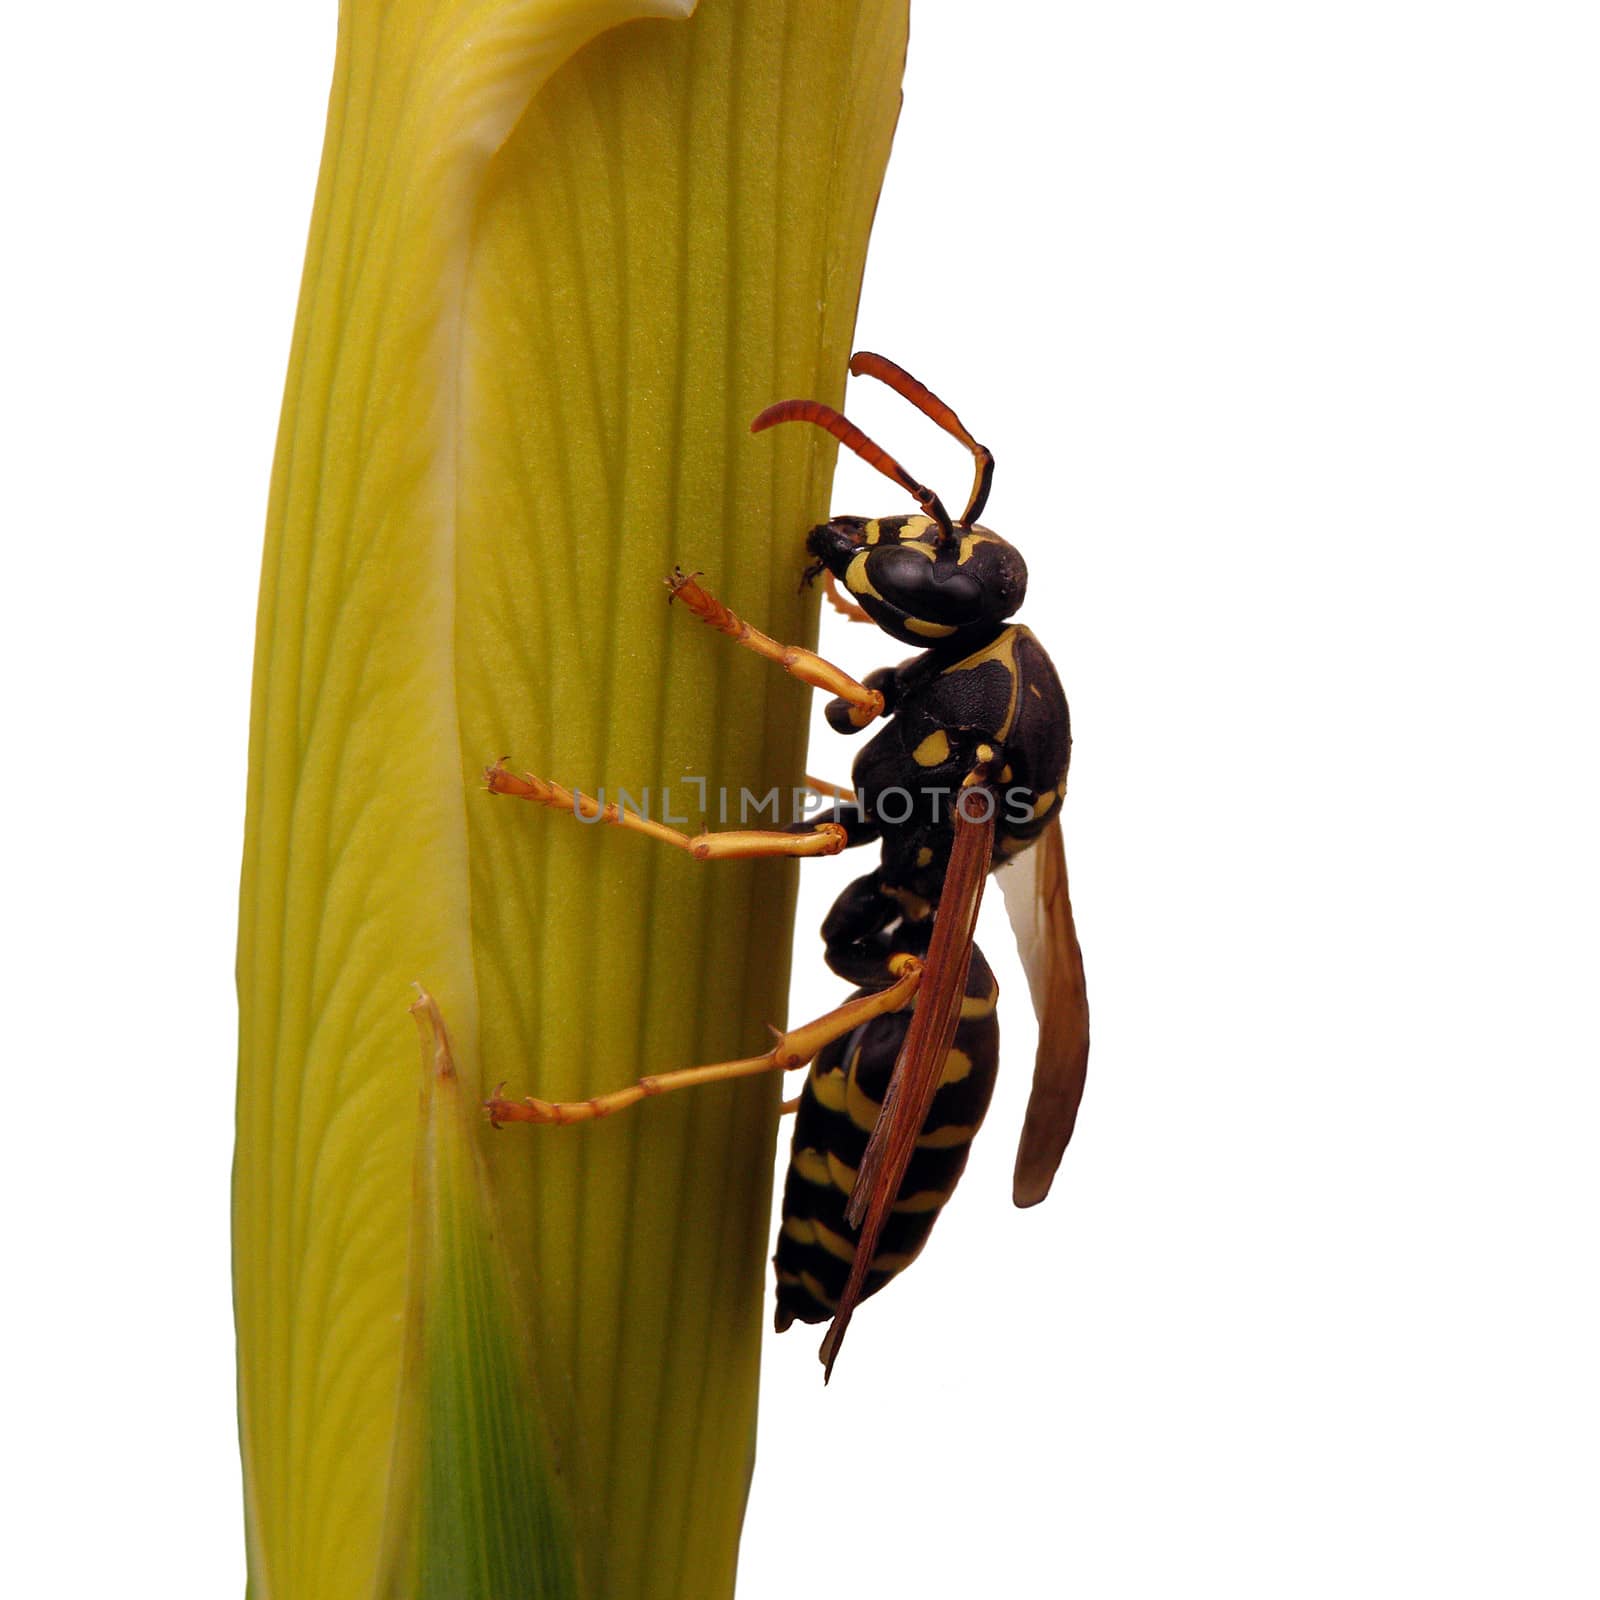  A striped wasp. Insect, yellow, macro, nature,isolated. 